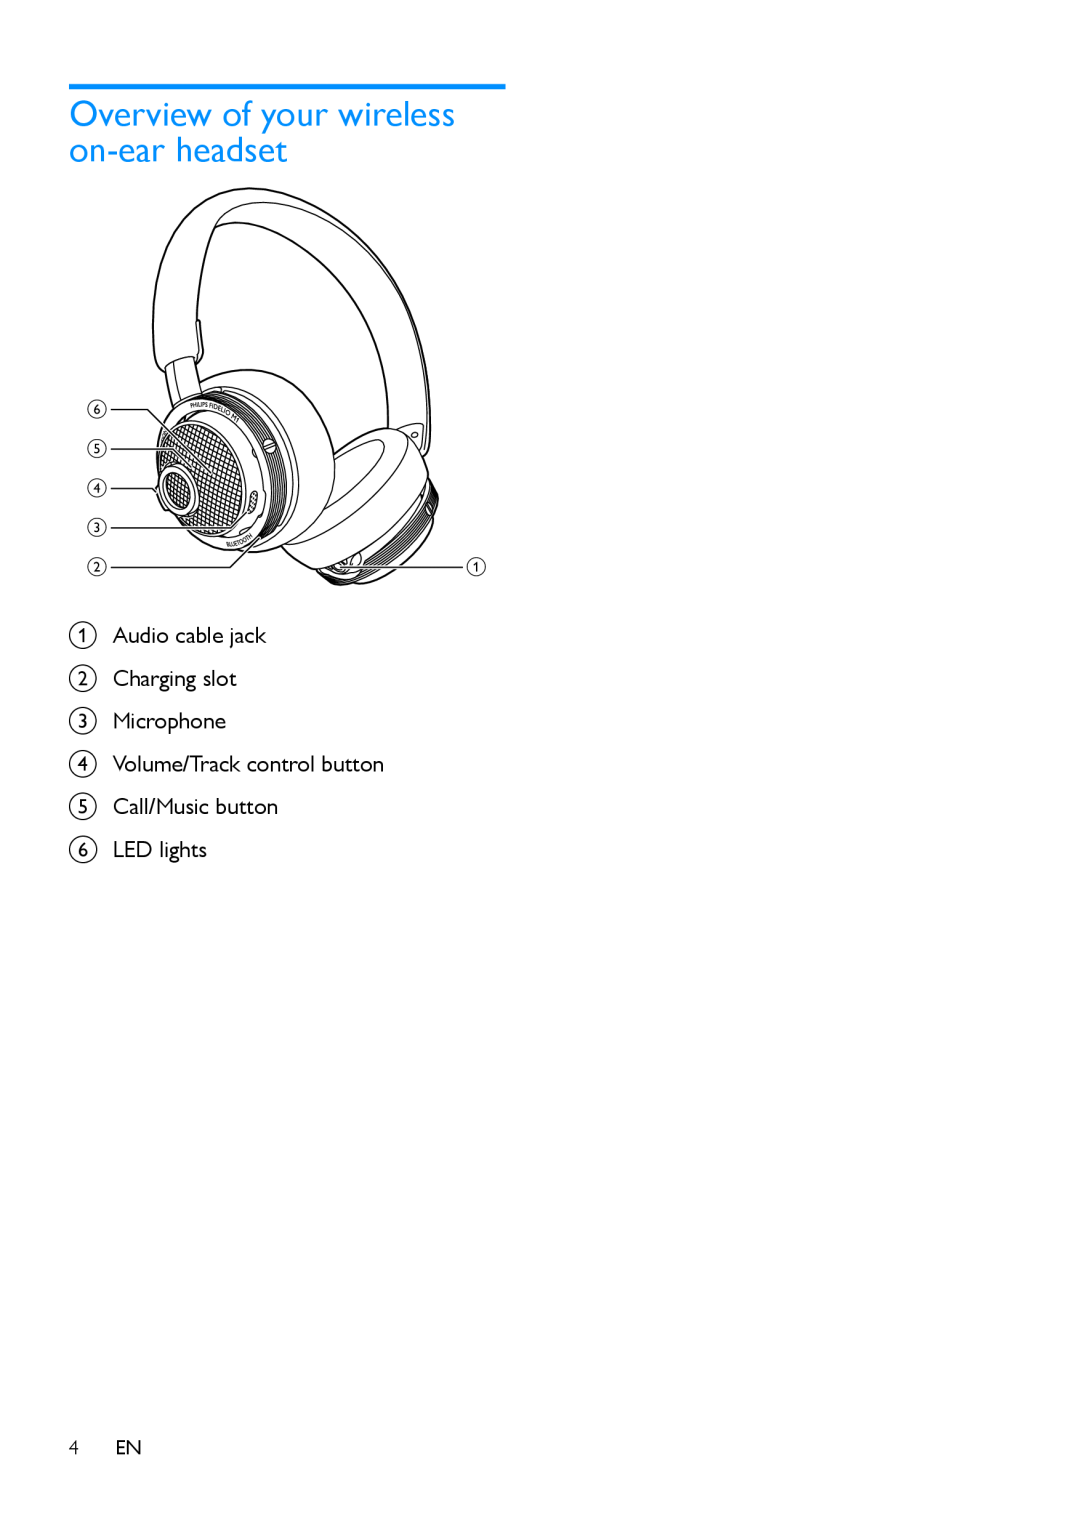 Philips M1BT Overview of your wireless on-earheadset, AAudio cable jack BCharging slot CMicrophone, FLED lights, f e dc ba 